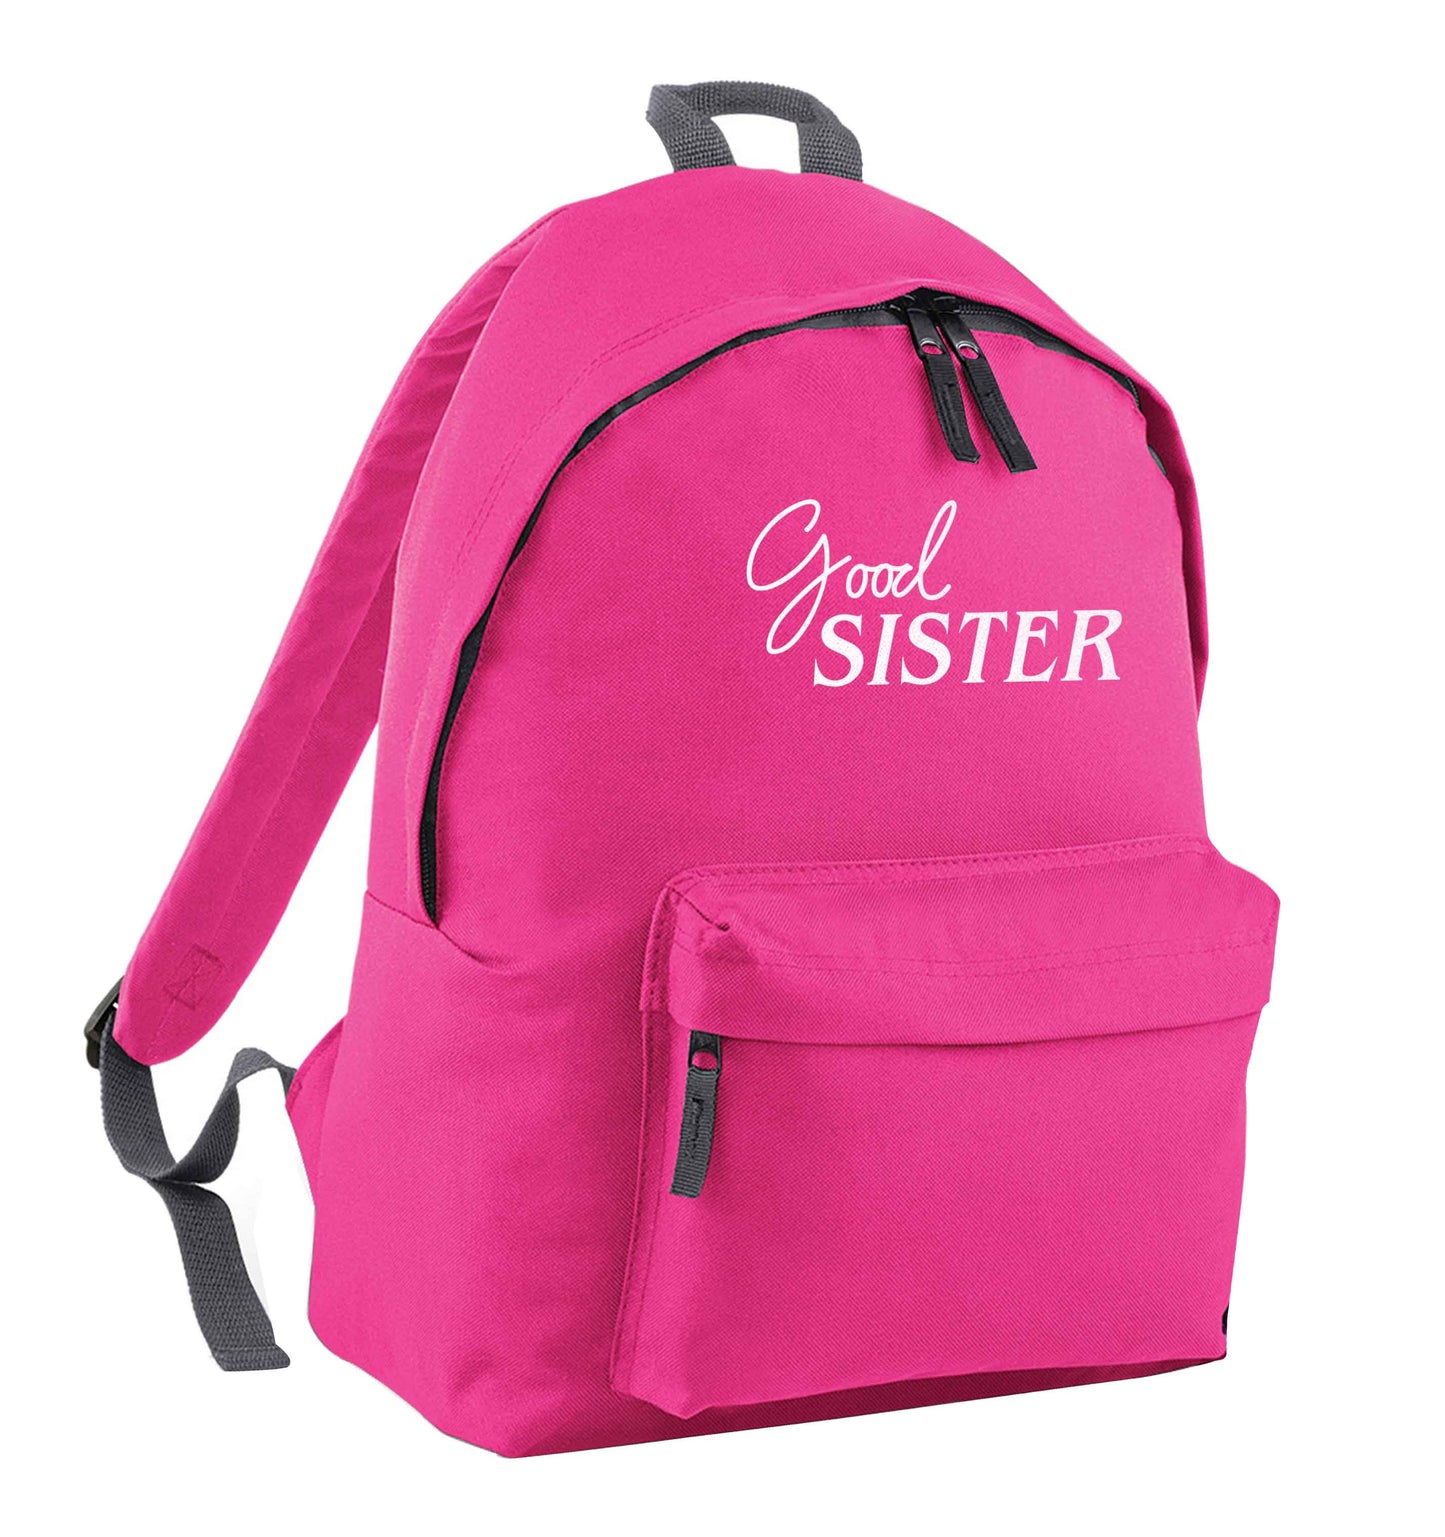 Good sister pink adults backpack